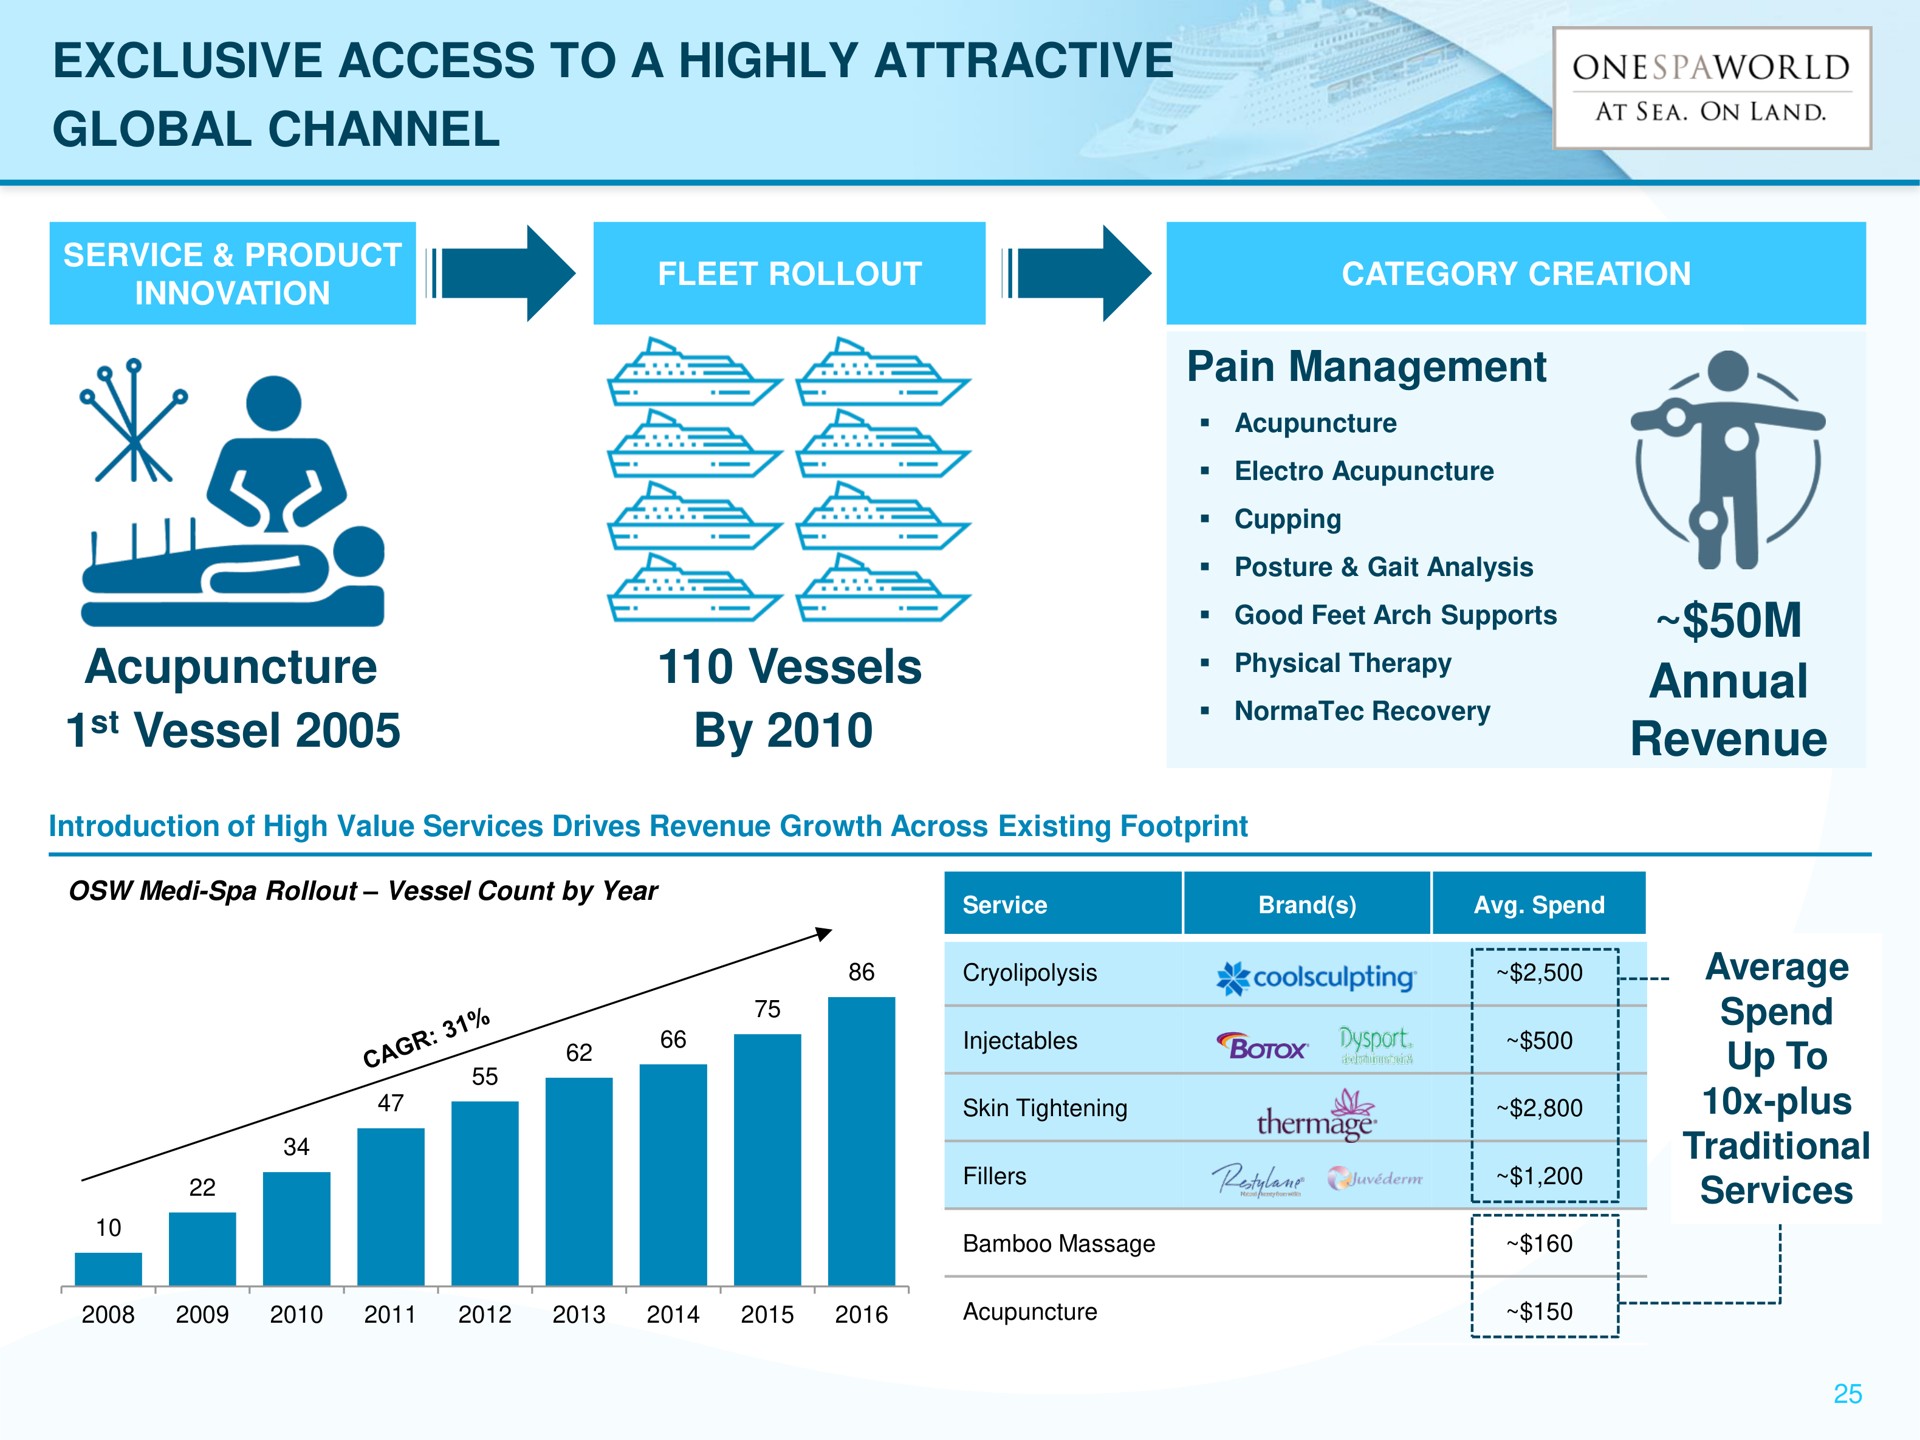 exclusive access to a highly attractive global channel acupuncture vessel vessels by pain management annual revenue geo services | OnesSpaWorld